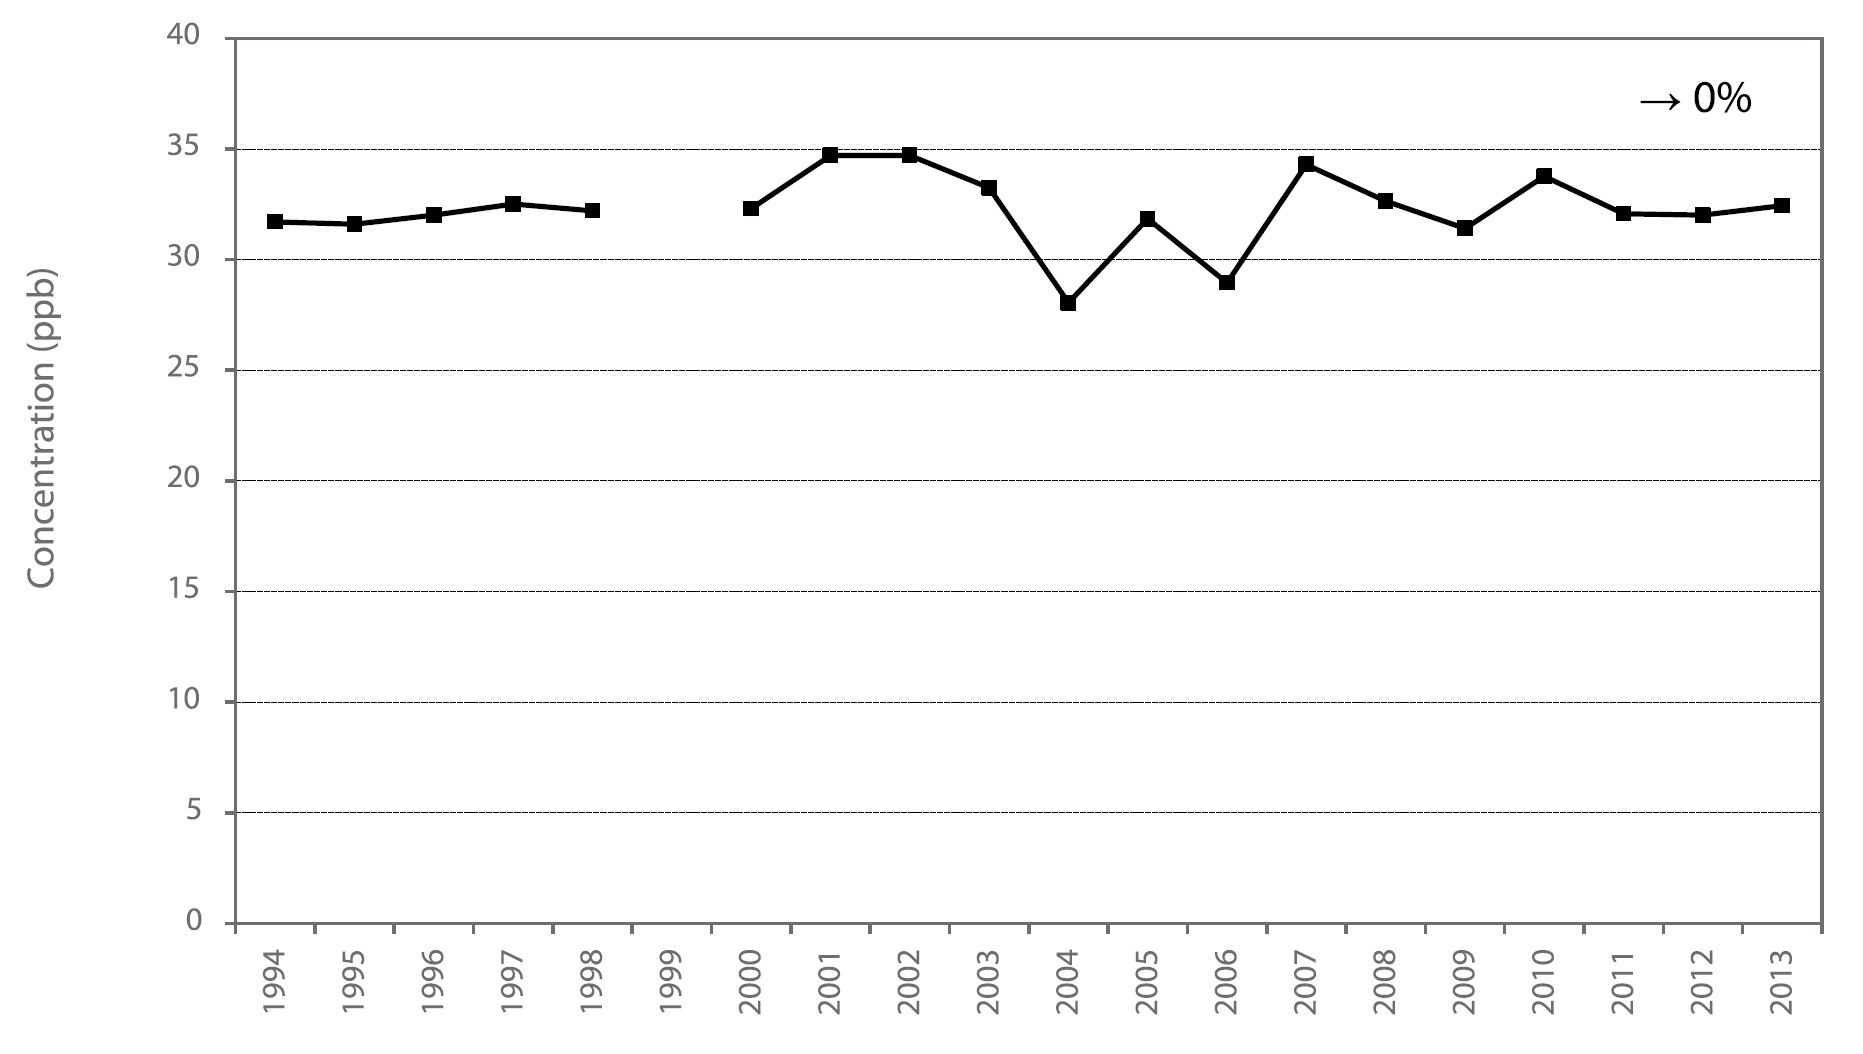 Figure A6 is a line chart displaying the ozone annual mean at Tiverton from 1994 to 2013. Over this 20-year period, ozone had no significant change.